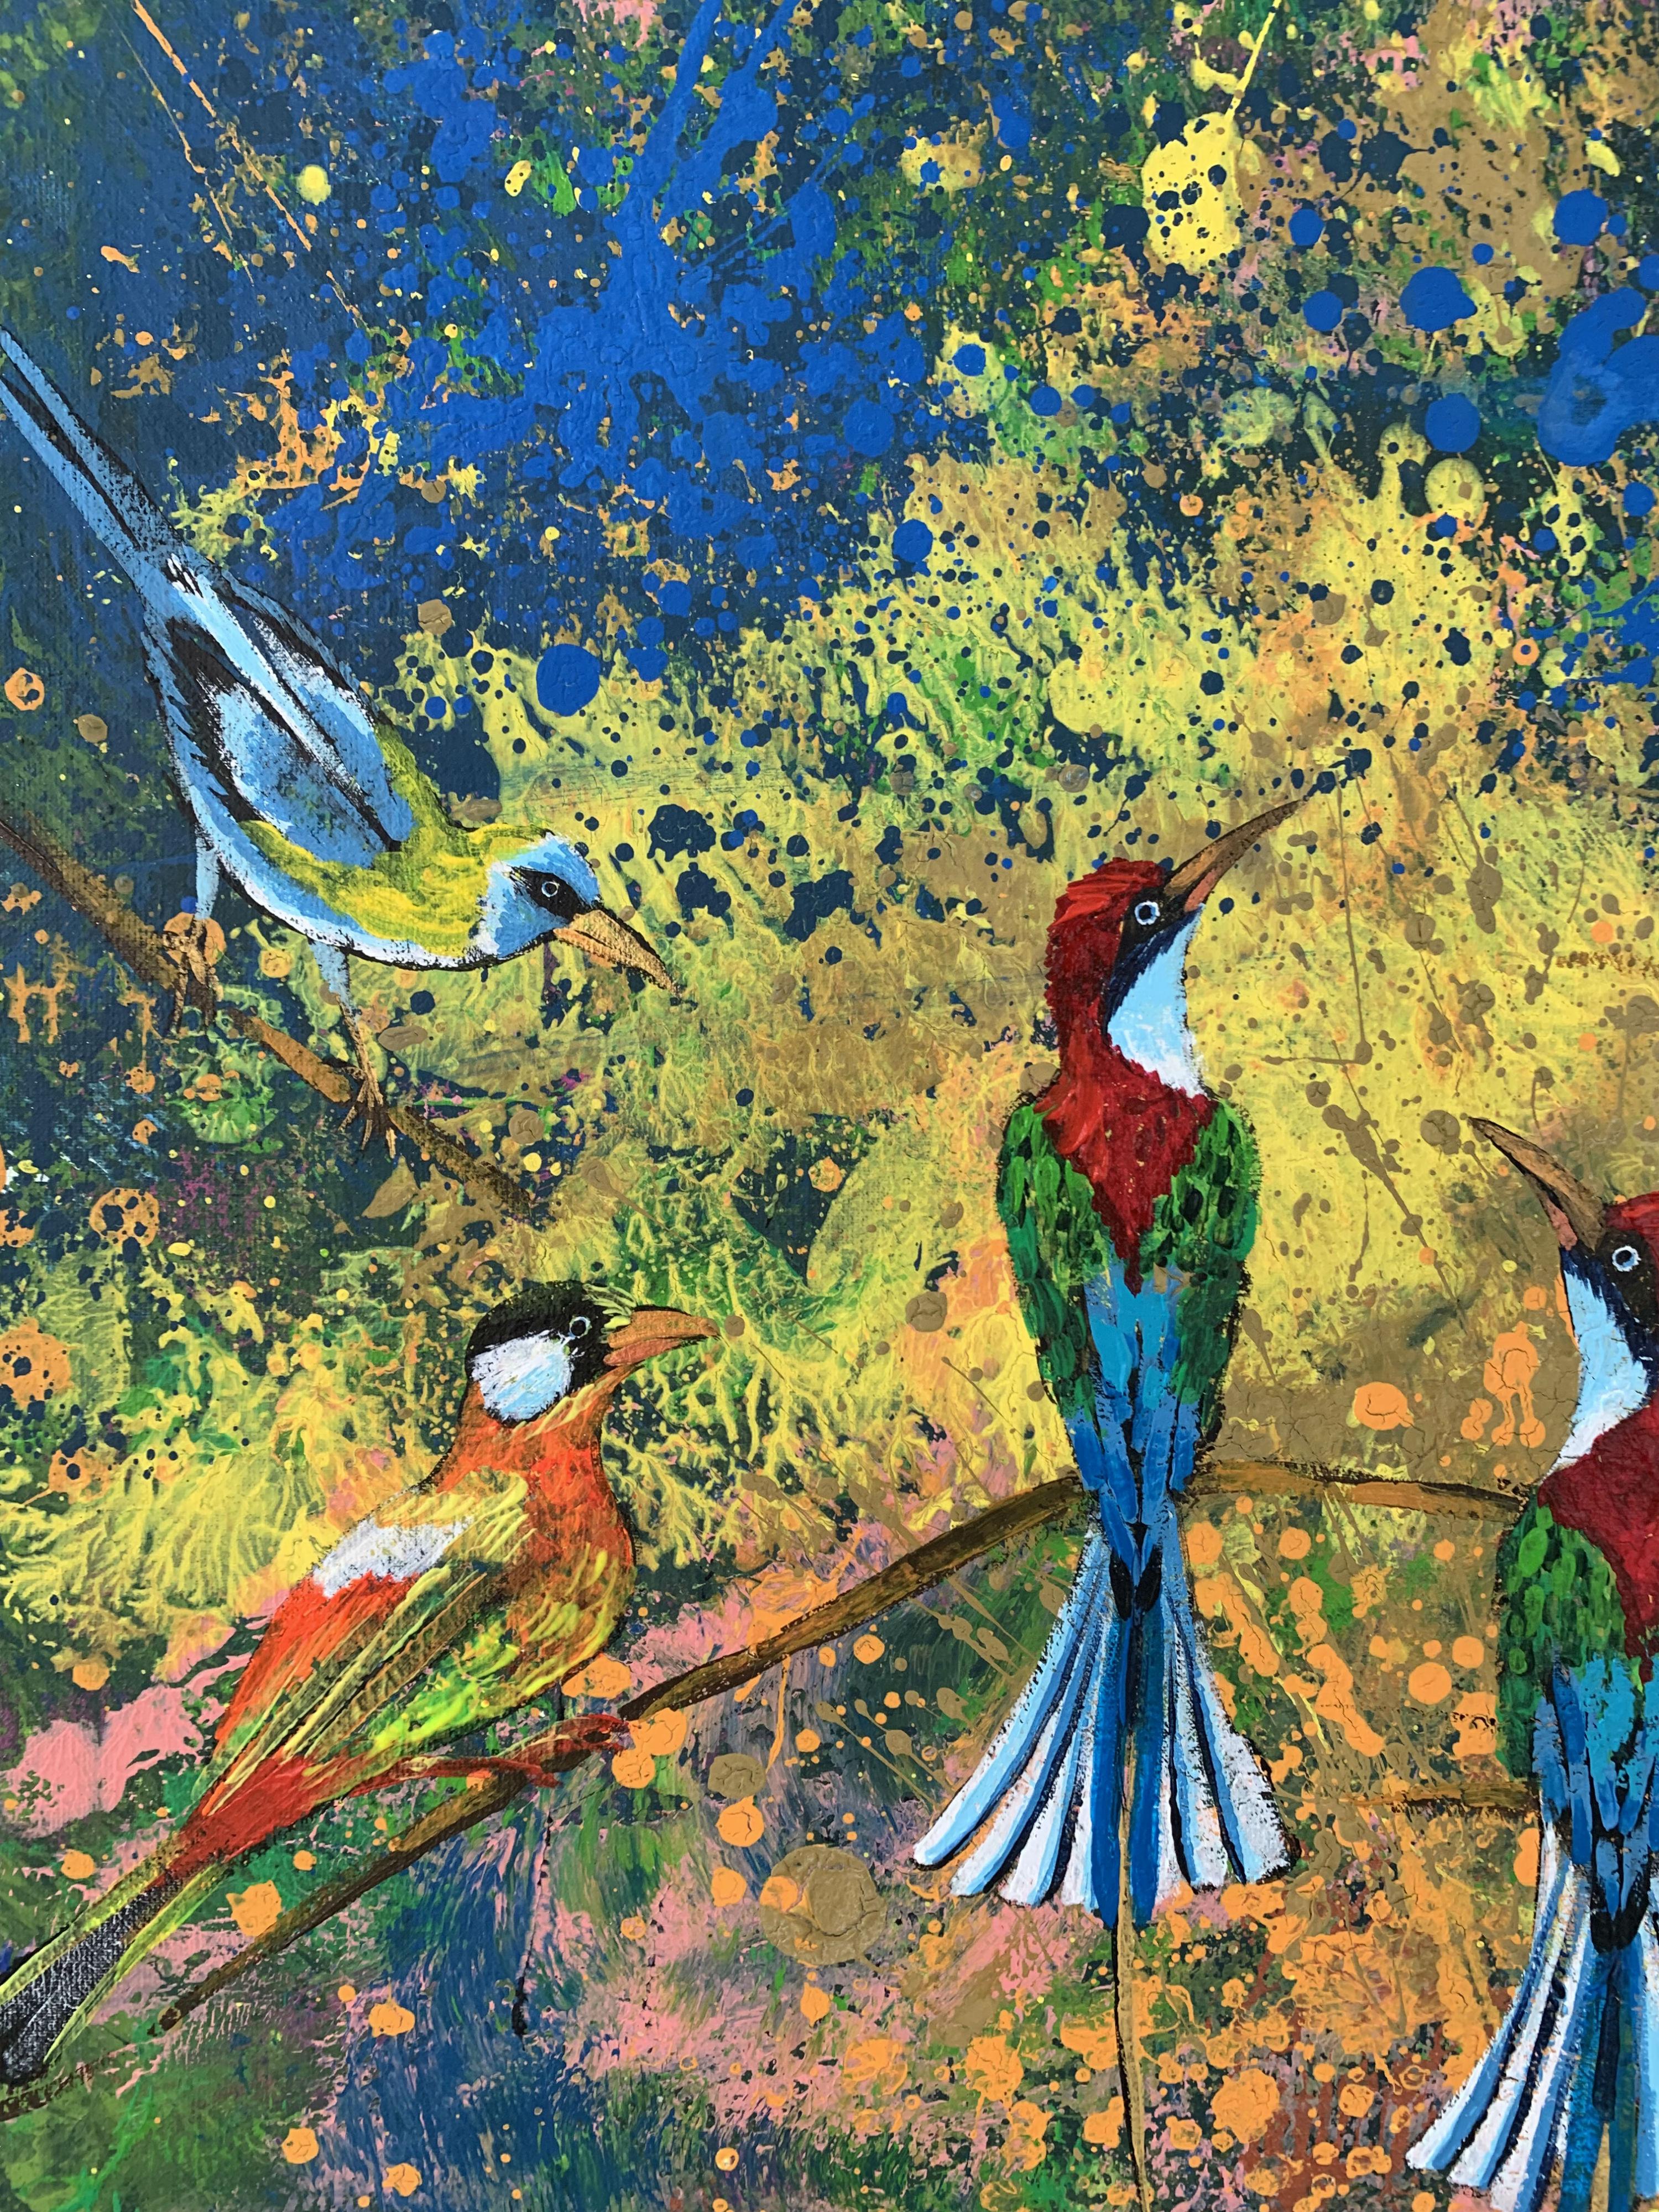 Gardens of Delight LVI - XXI century figurative oil painting, Birds, Colorful - Contemporary Painting by Magdalena Nałęcz